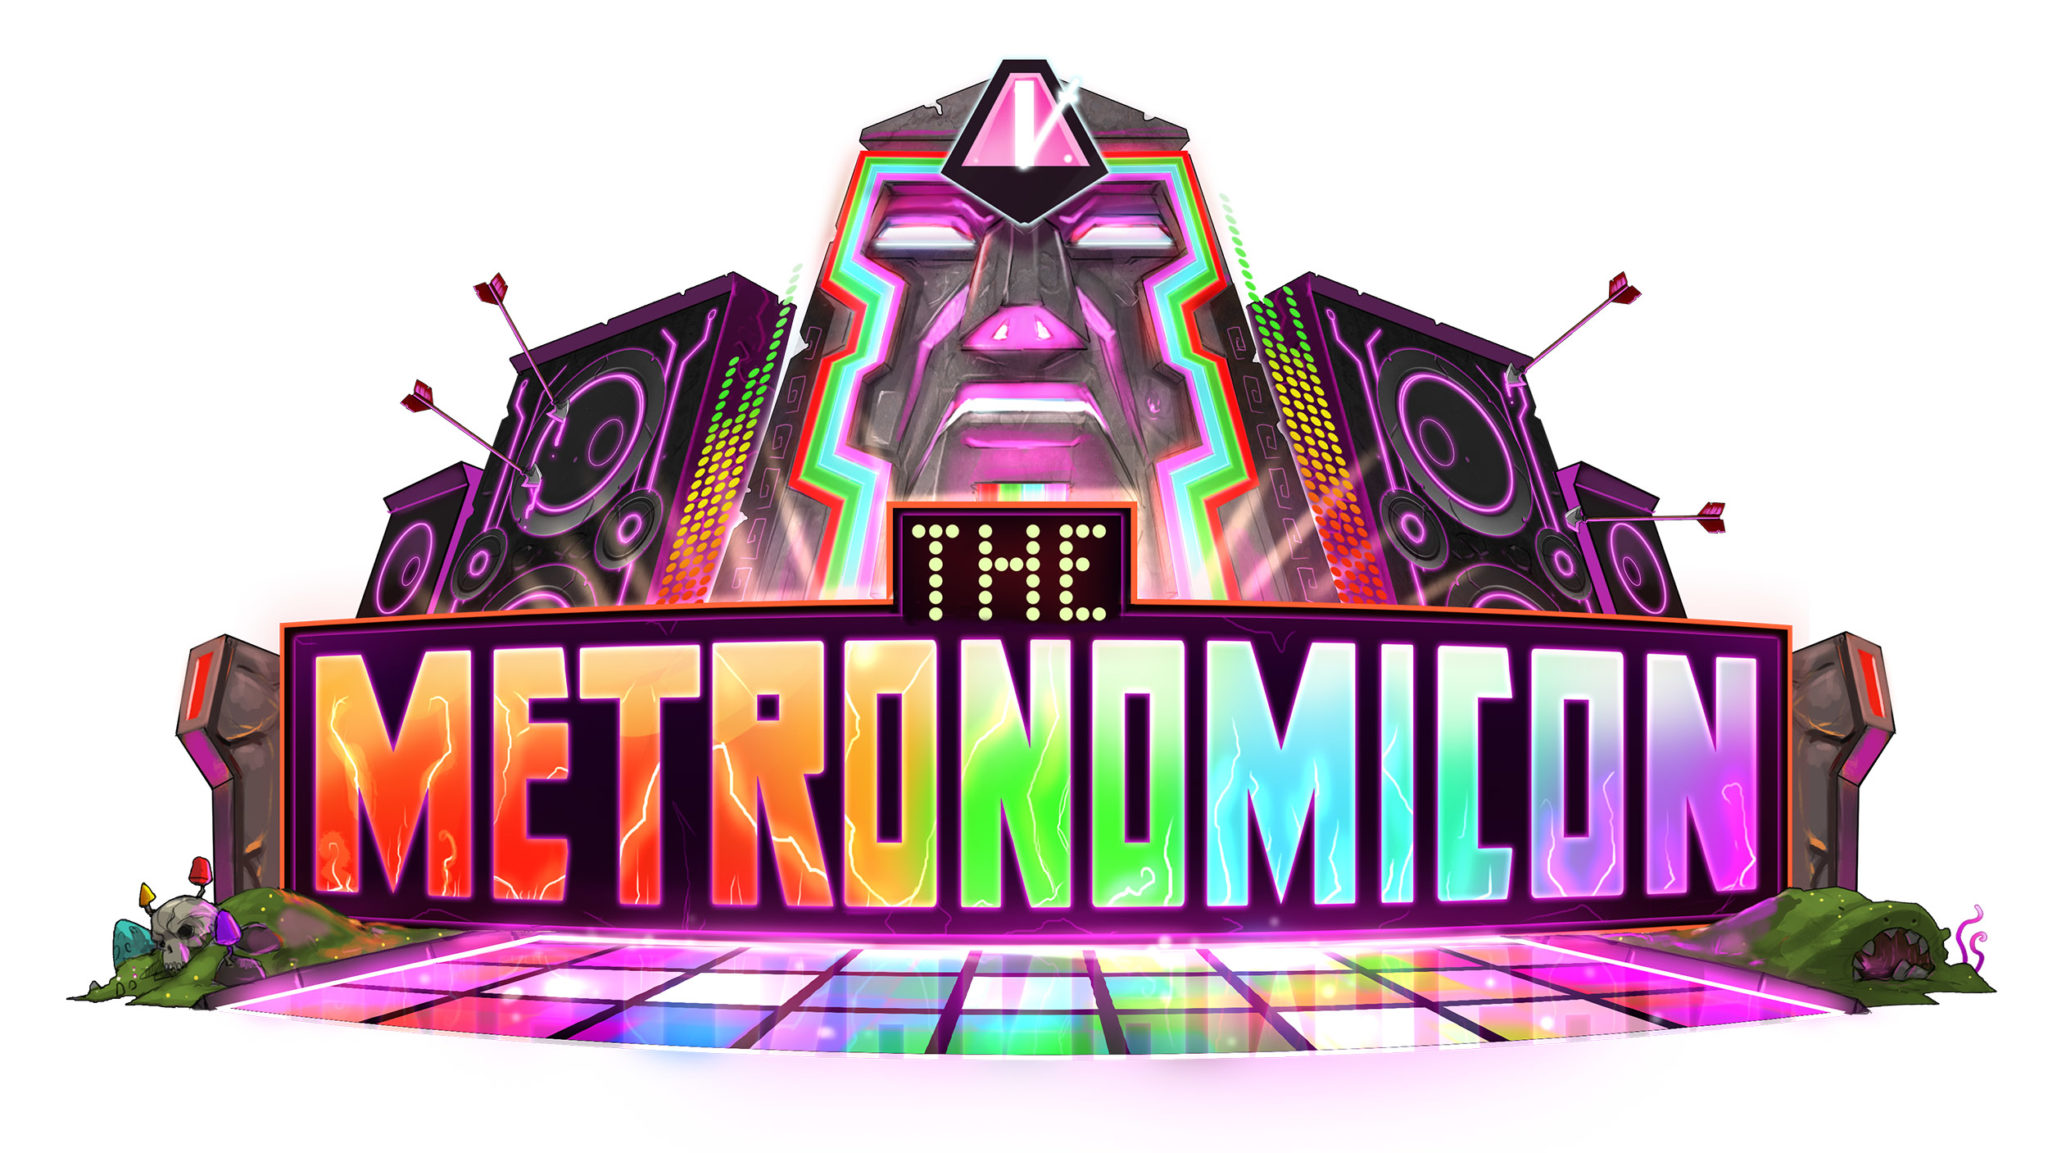 The Metronomicon download the last version for windows